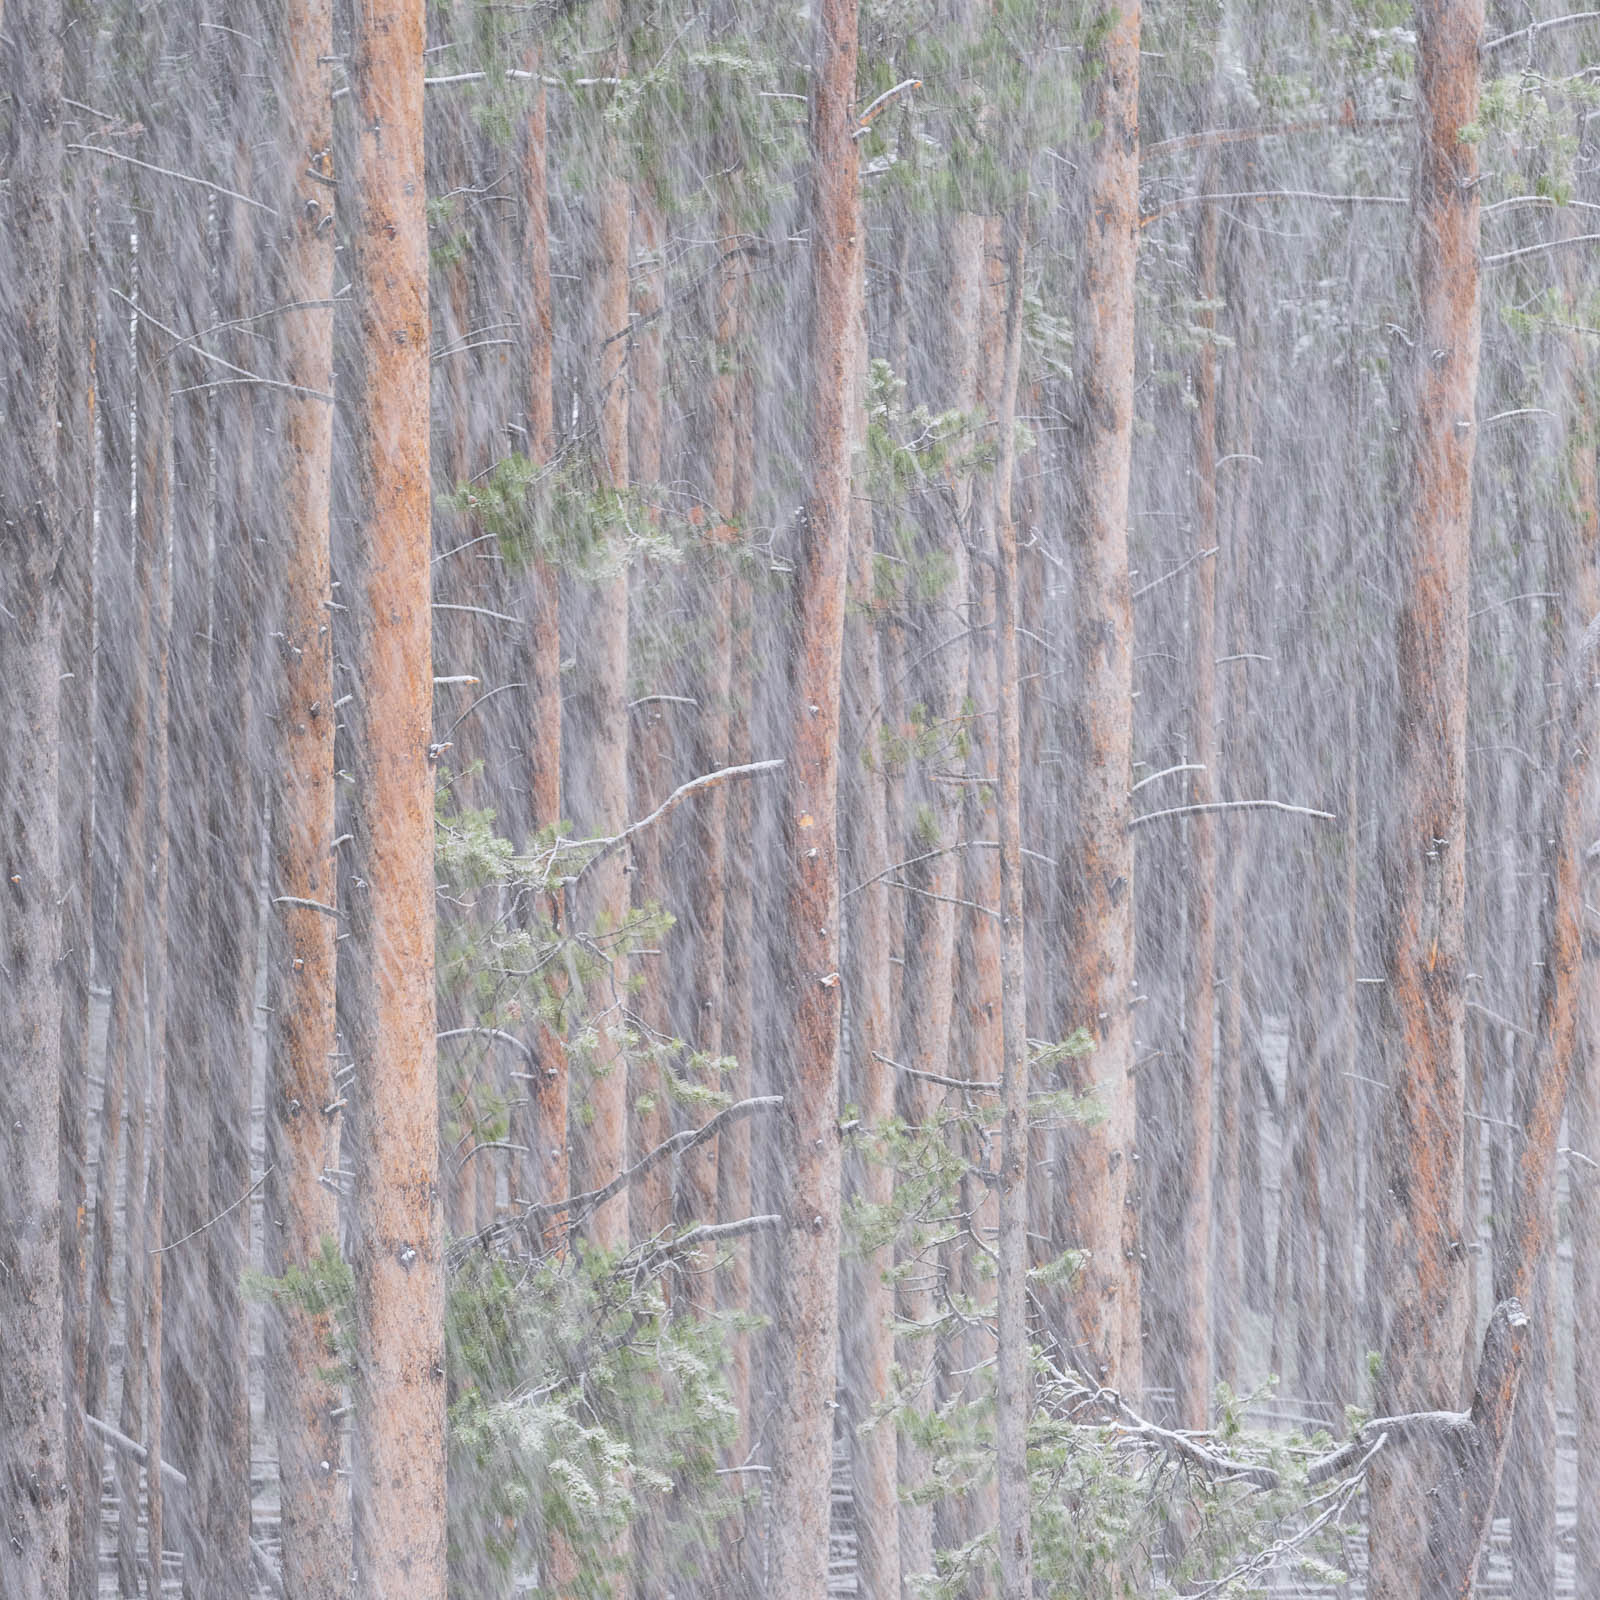 A snow storm in Yellowstone National Park